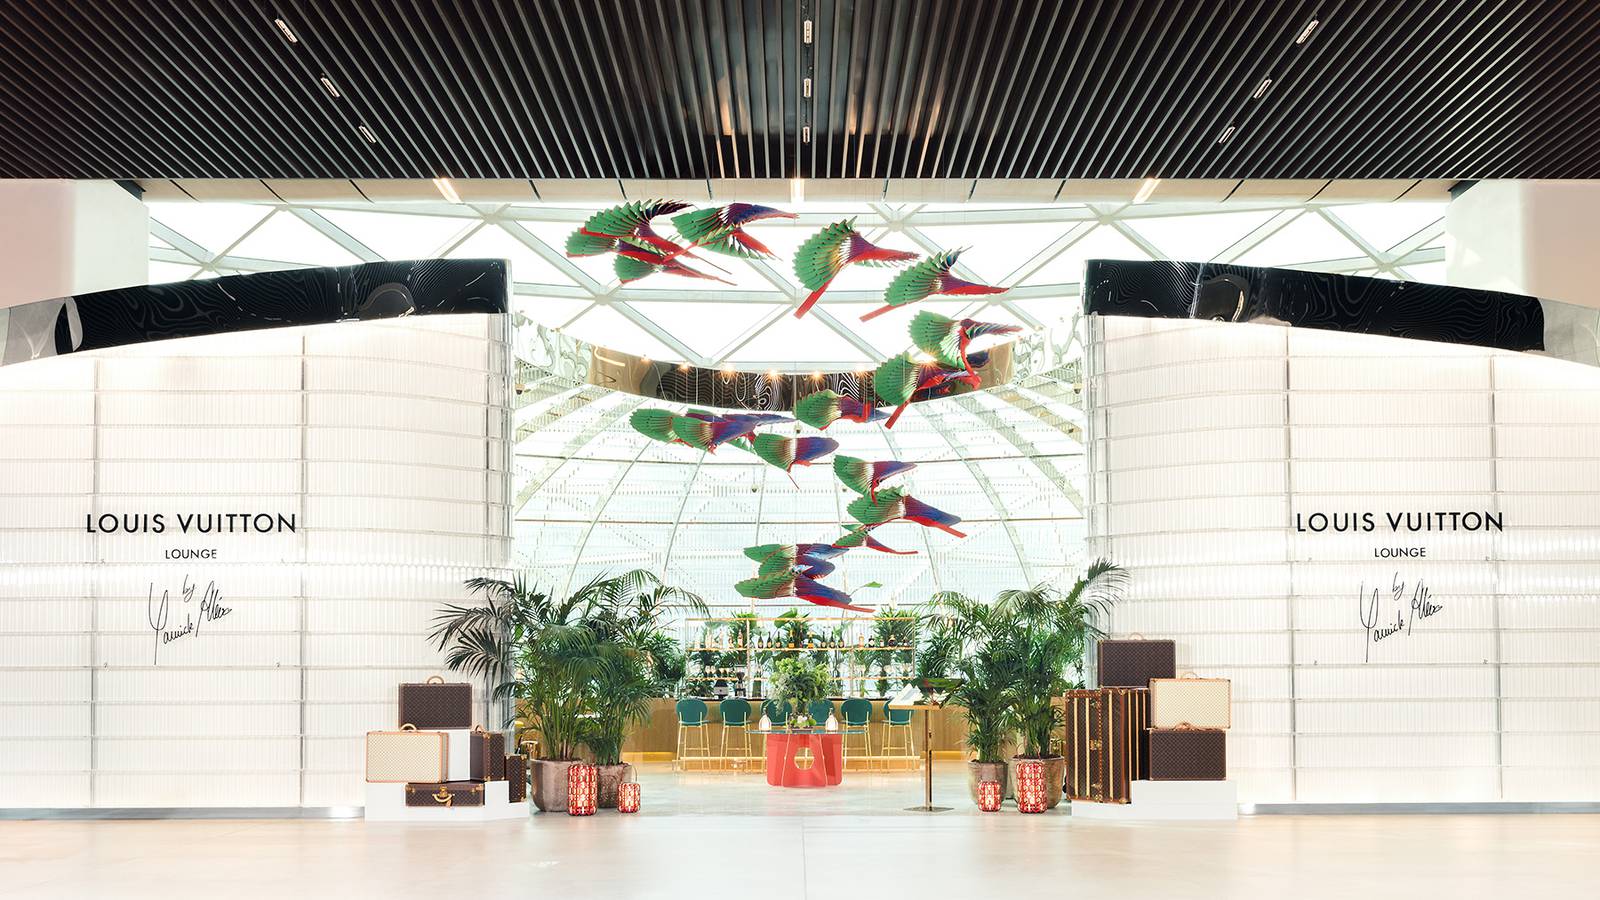 LOUIS VUITTON´S First Airport Store & VIP Lounge - Doha Intl. Airport in  Qatar. 